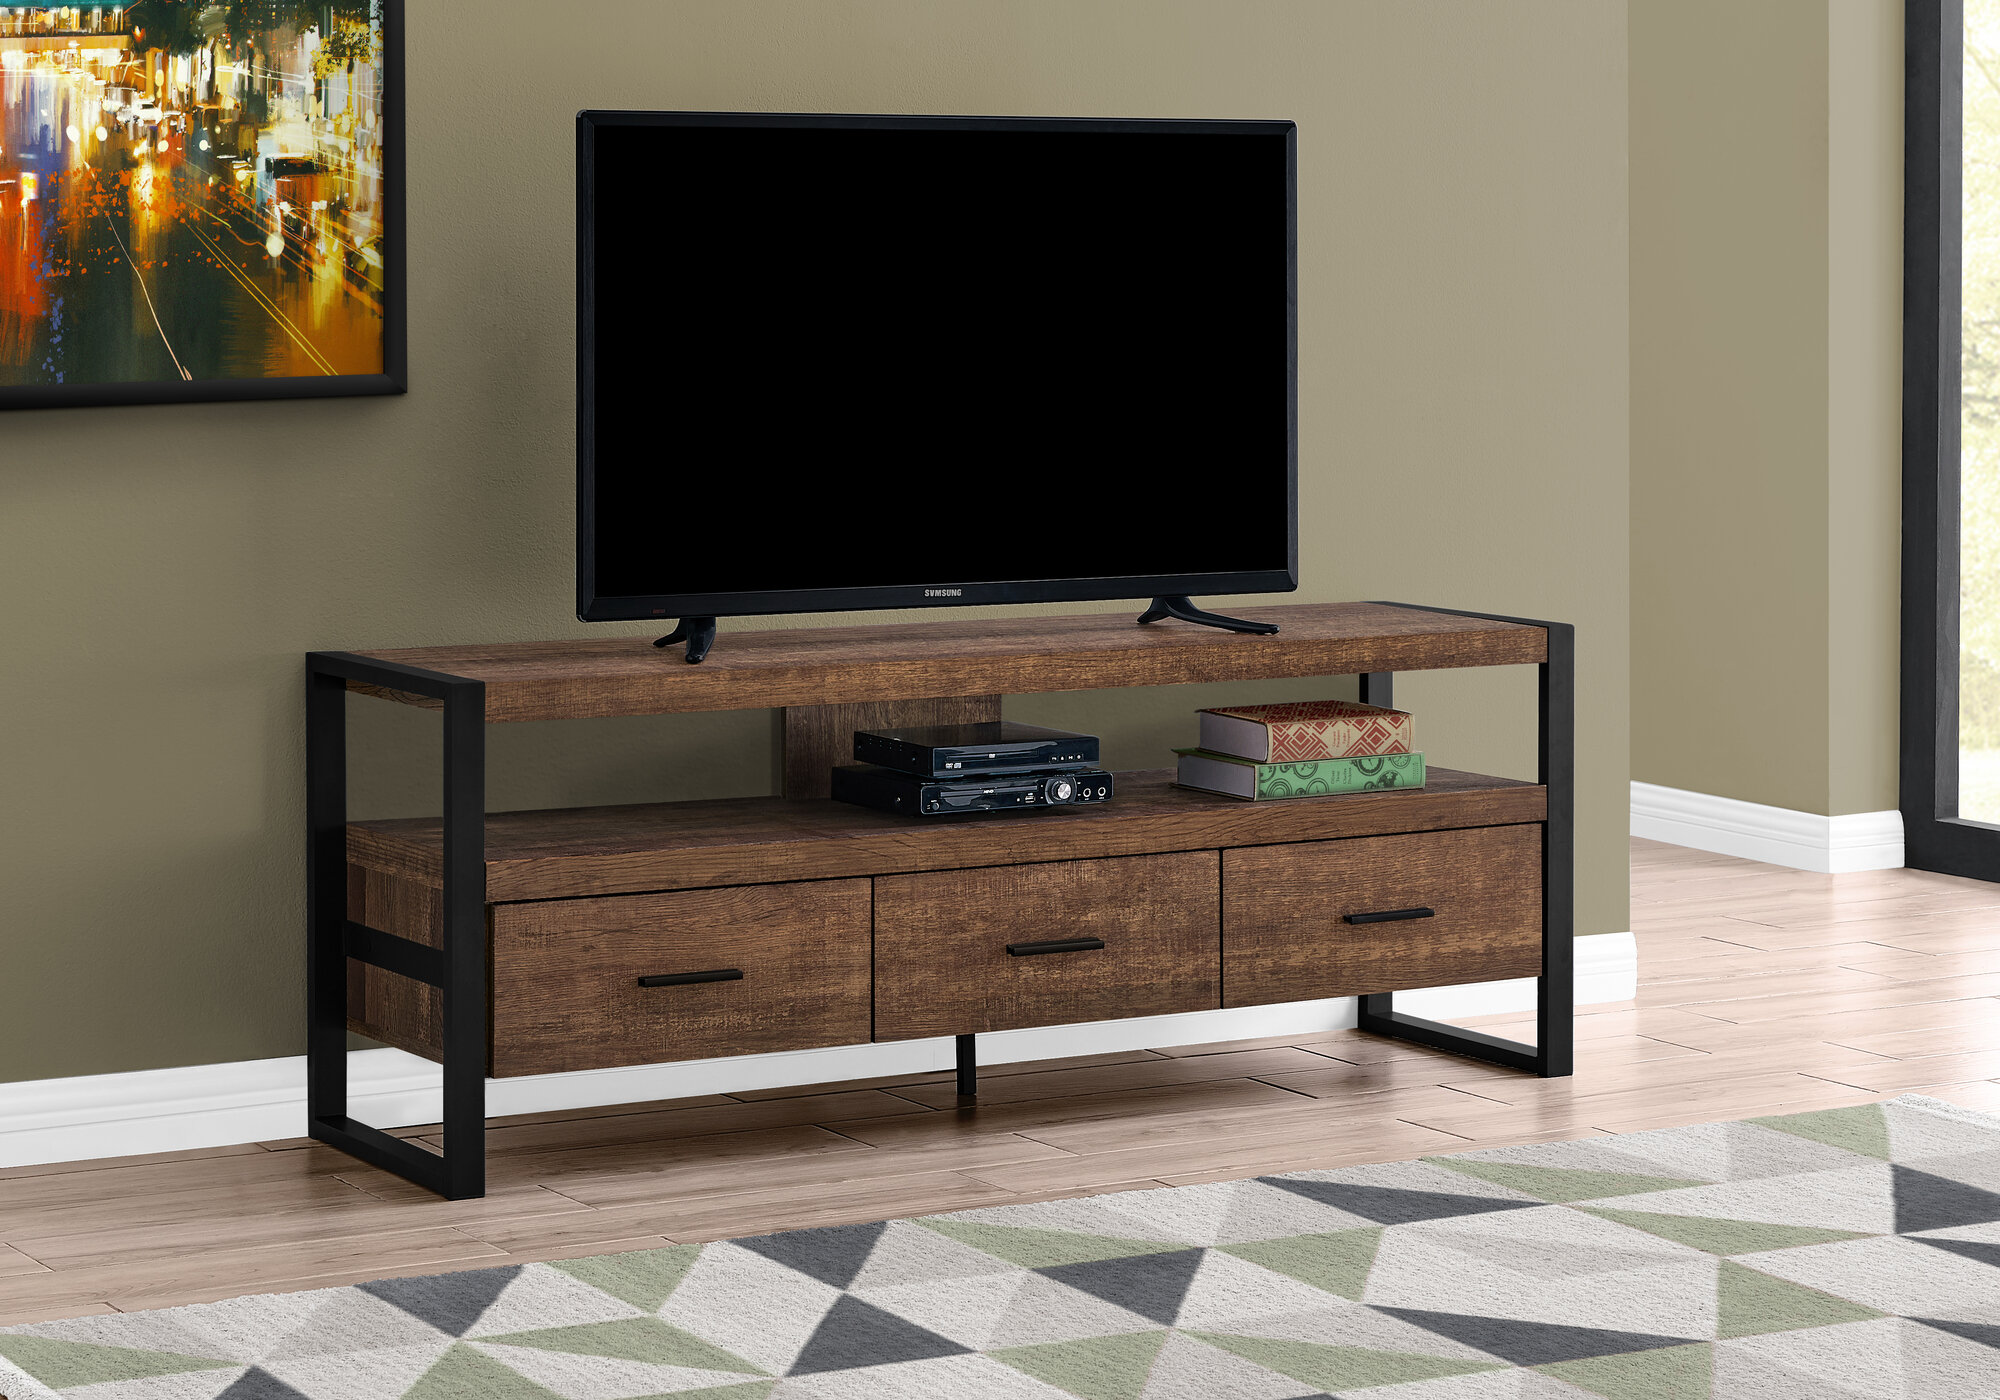 Union Rustic Hallatrow Tv Stand For Tvs Up To 75 Reviews